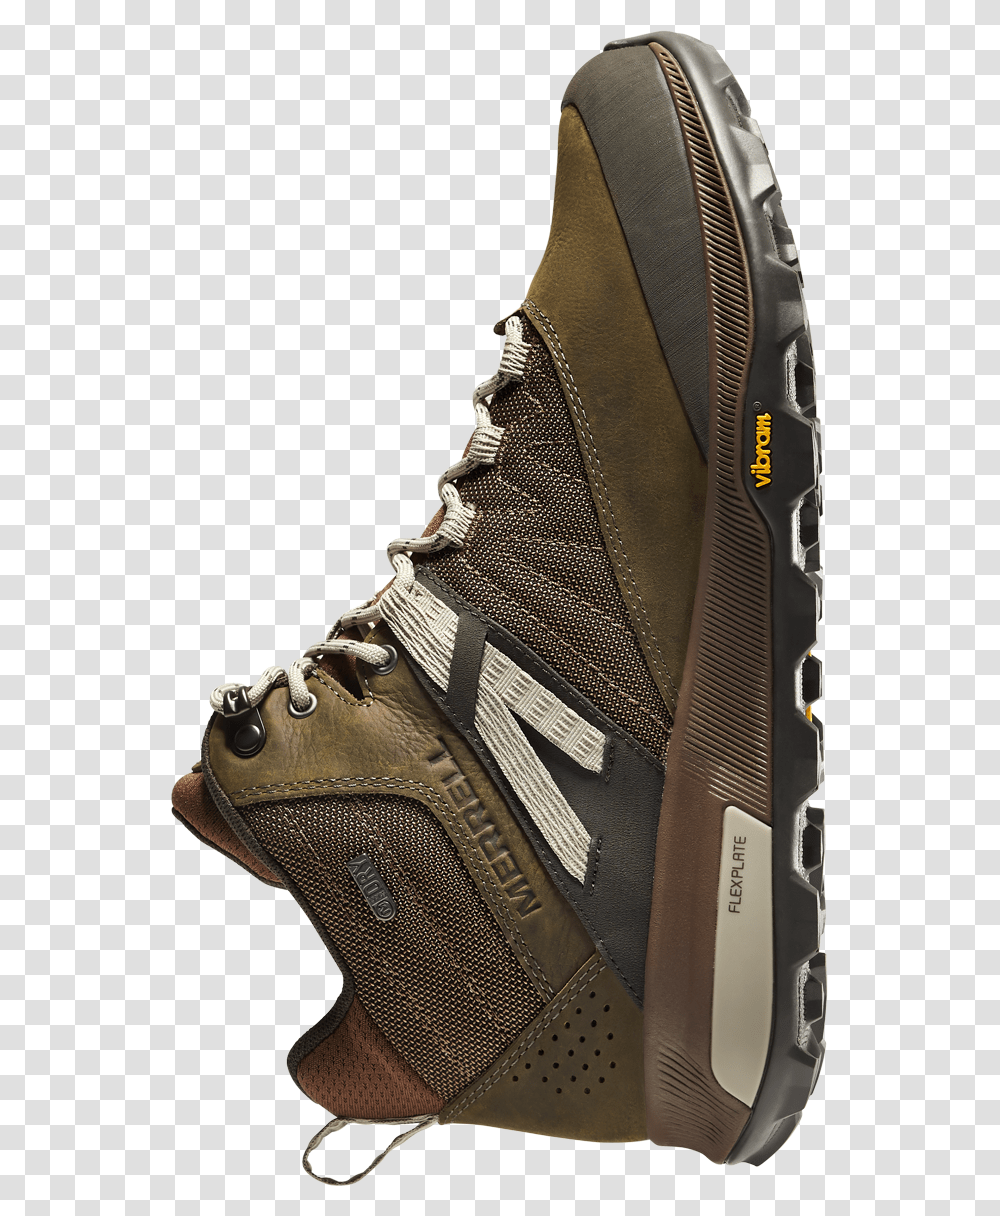 Floating Zion Boot Hiking Shoe, Apparel, Tie, Accessories Transparent Png